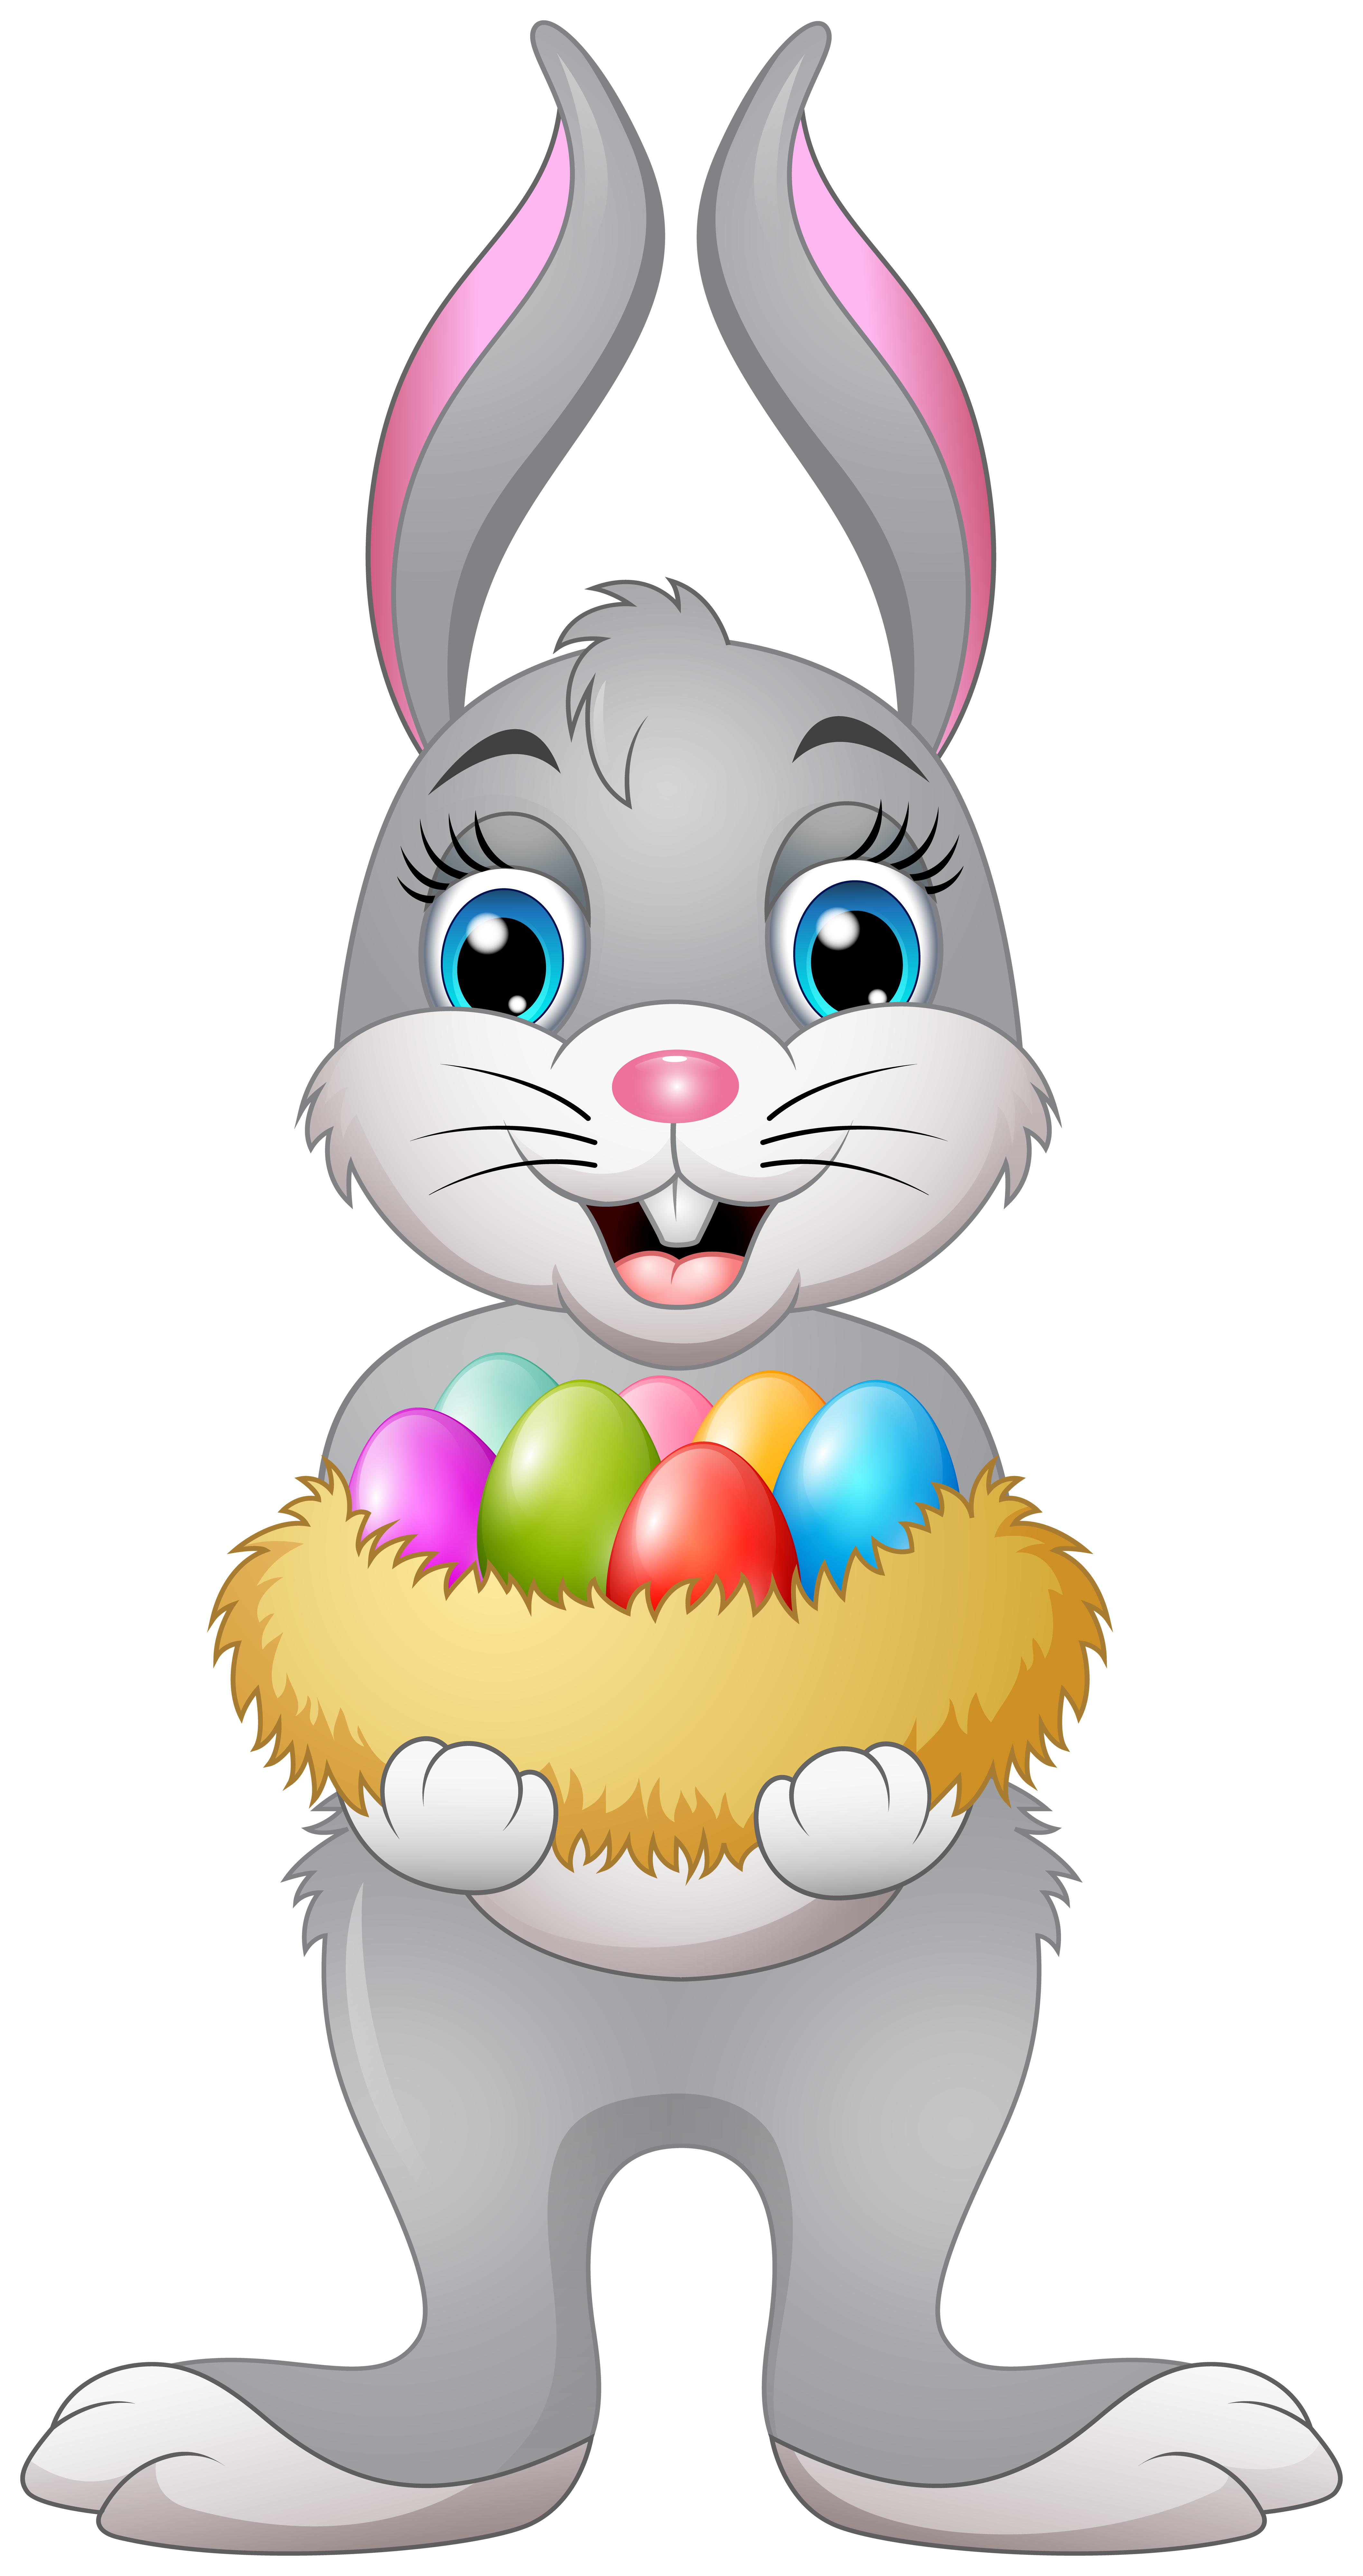 https://gallery.yopriceville.com/var/albums/Free-Clipart-Pictures/Easter-Pictures-PNG/Easter_Bunny_Transparent_Image.png?m=1552494551